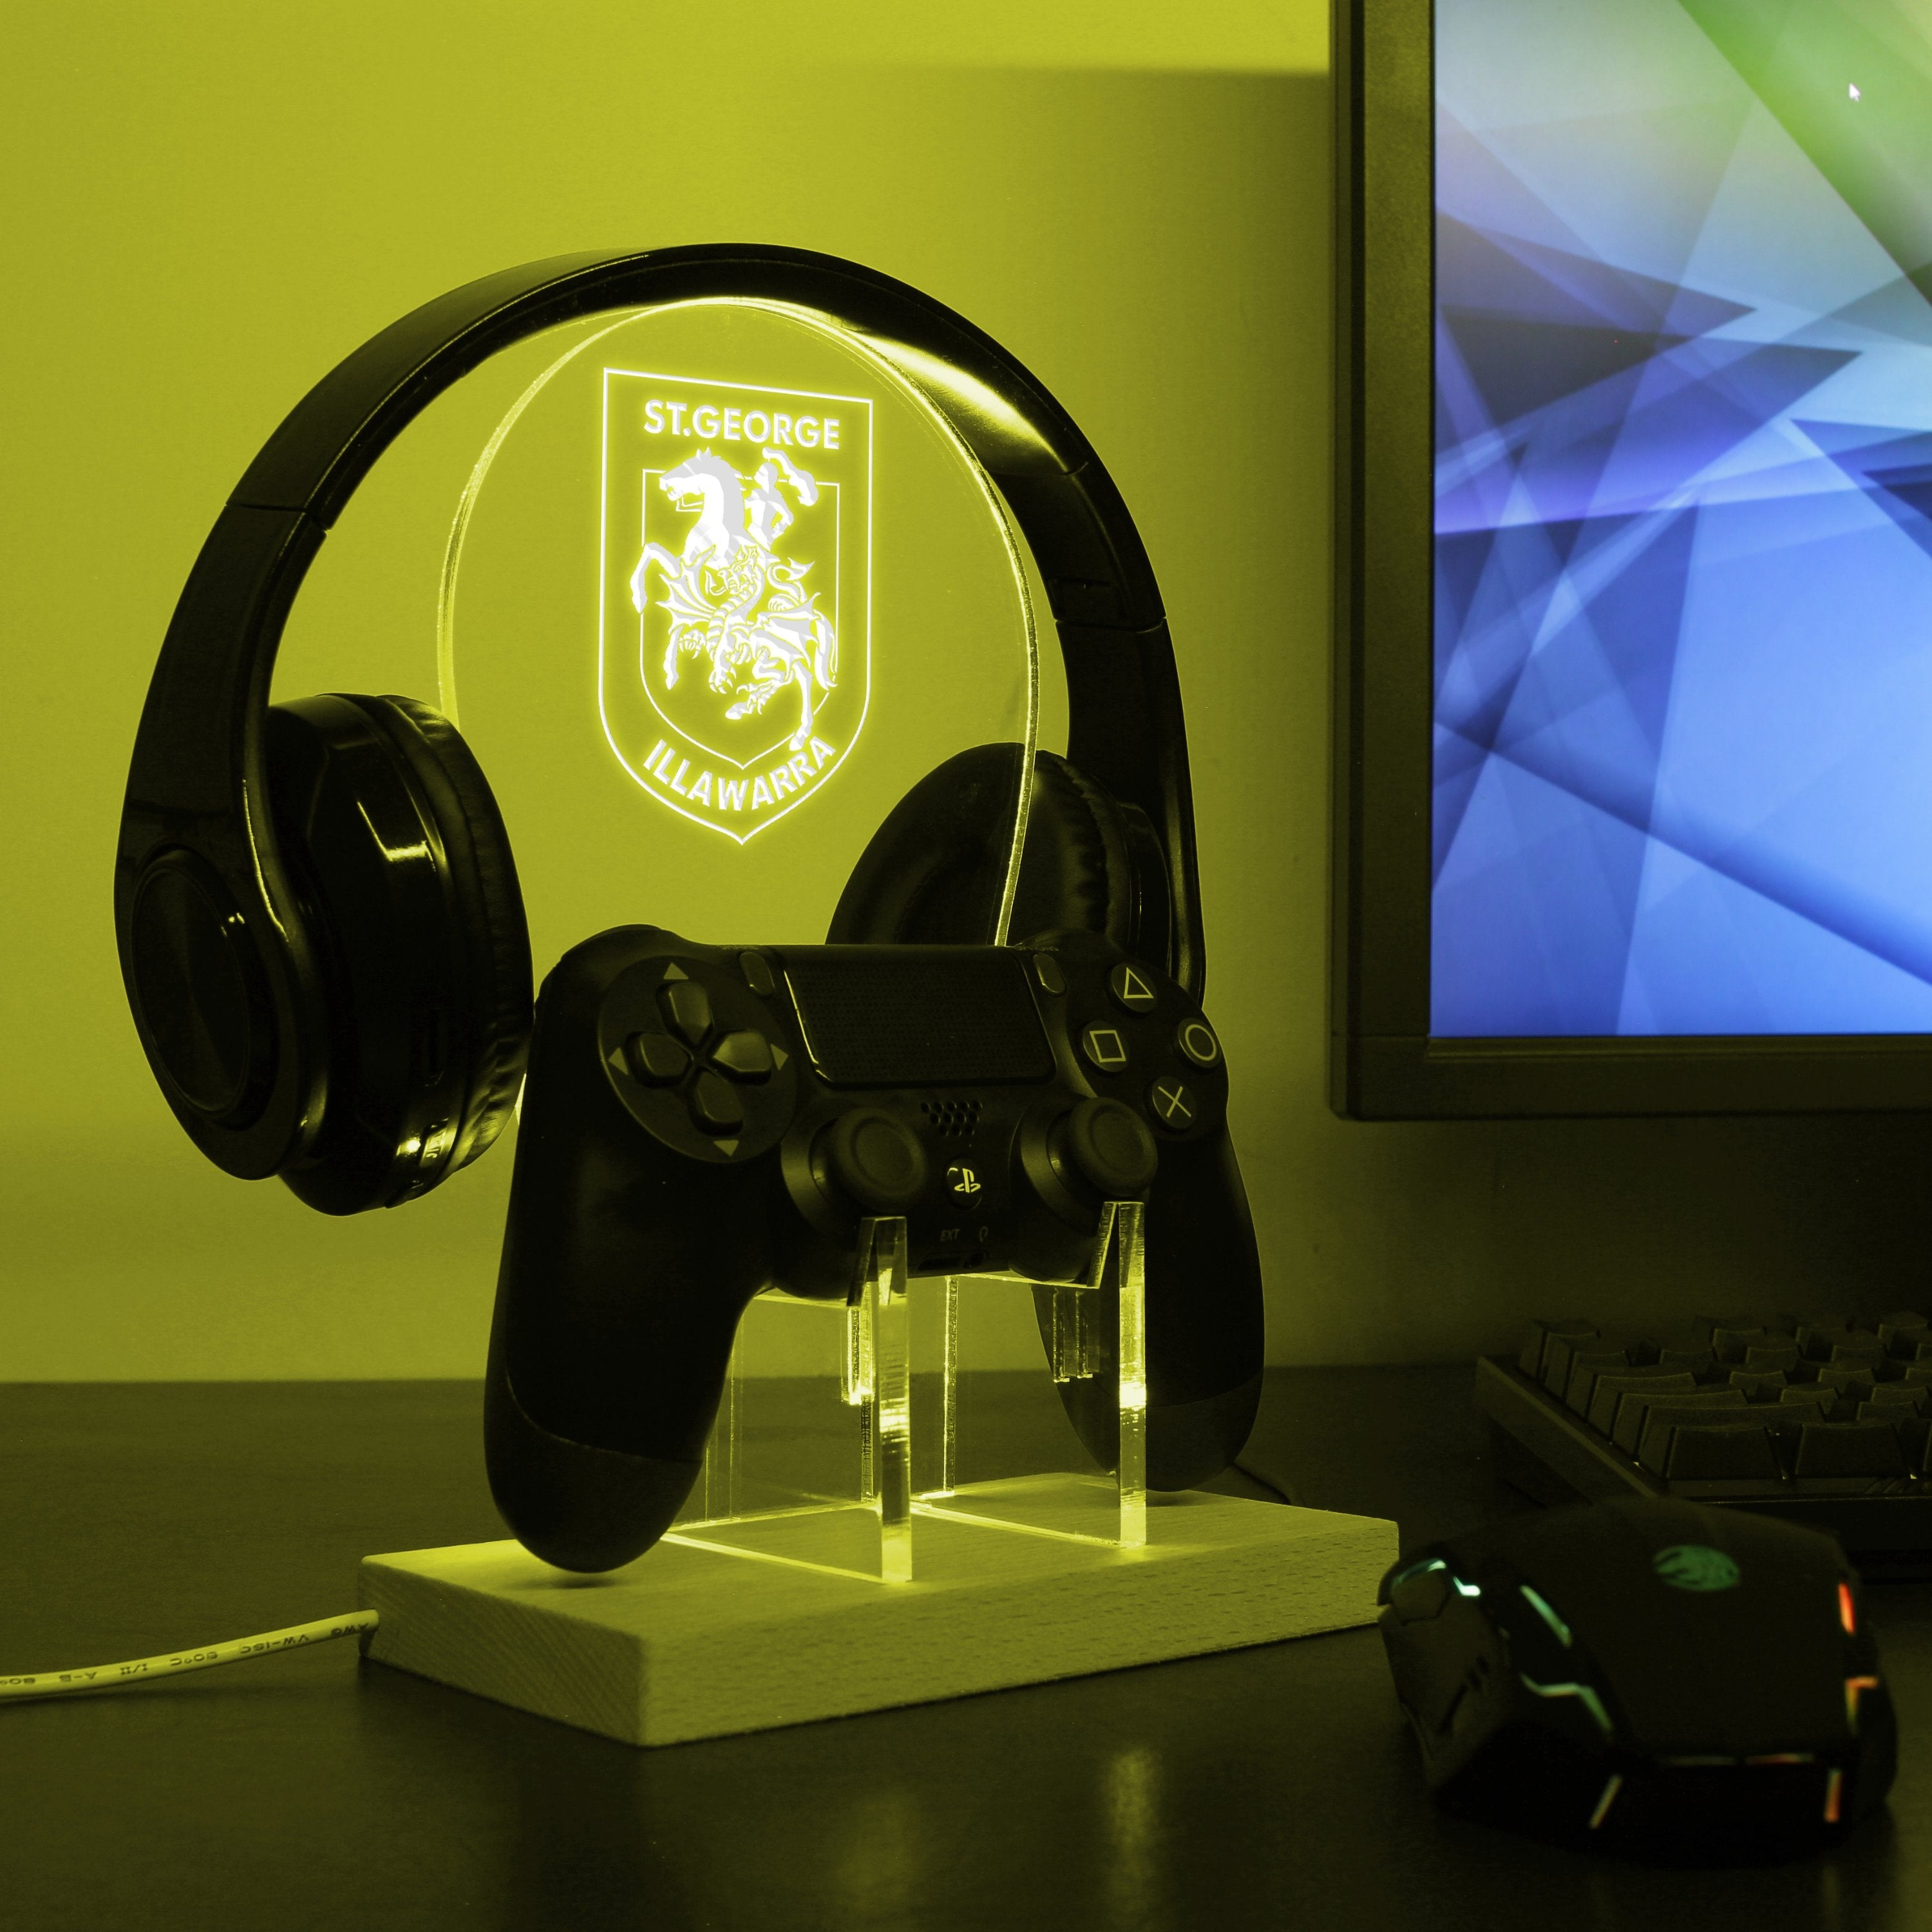 St. George Illawarra Dragons LED Gaming Headset Controller Stand